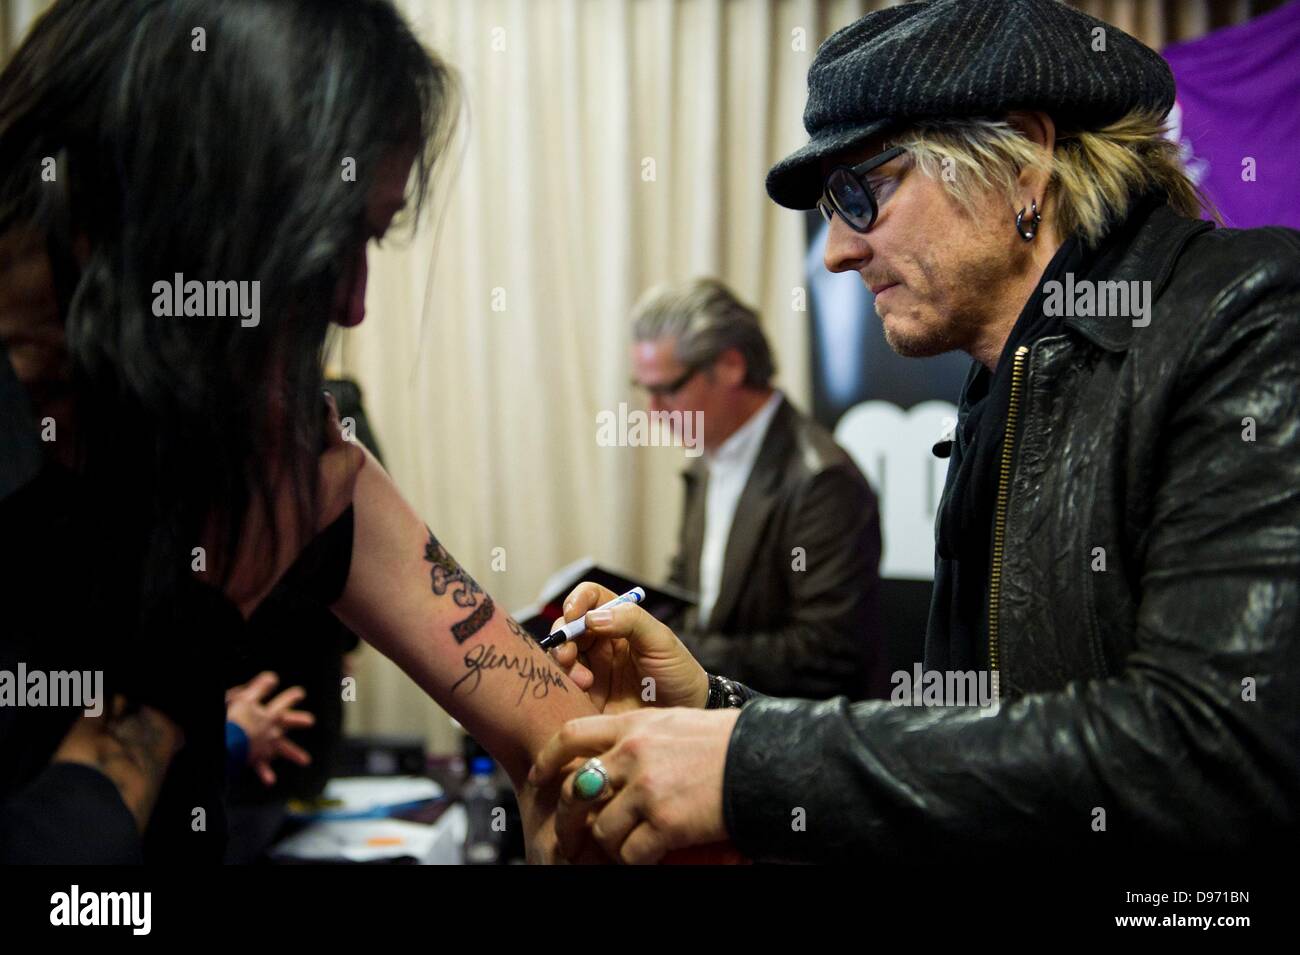 Johannesburg, South Africa. June 12, 2013.  Matt Sorum at the Jacaranda FM studios on June 12, 2013, in Johannesburg, South Africa. Kings of Chaos performed in Cape Town on June 8, 2013 and are set to perform in Johannesburg on June 15 and 16, 2013. Credit:  Gallo images/Alamy Live News Stock Photo